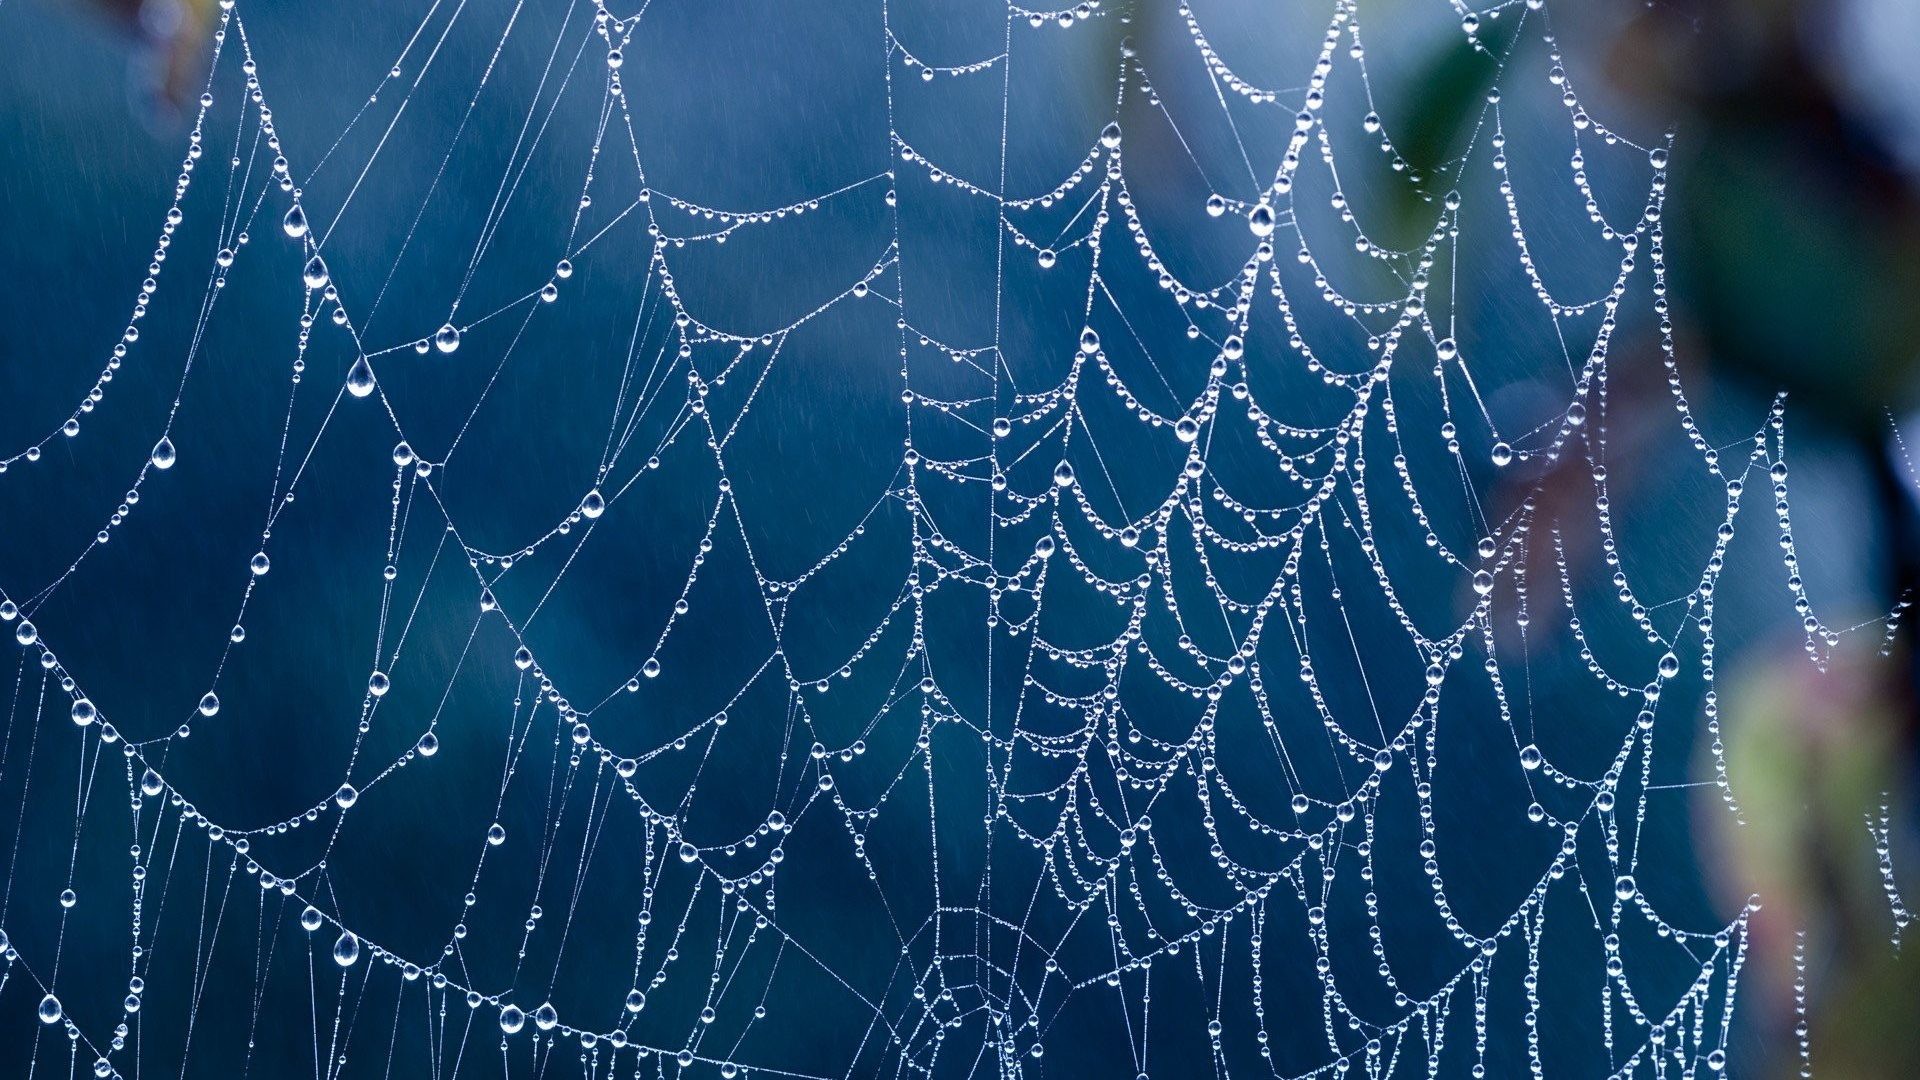 1920x1080 Creepy Tag - Creepy Spider Webs Hd Full Size Nature Wallpaper for HD 16:9